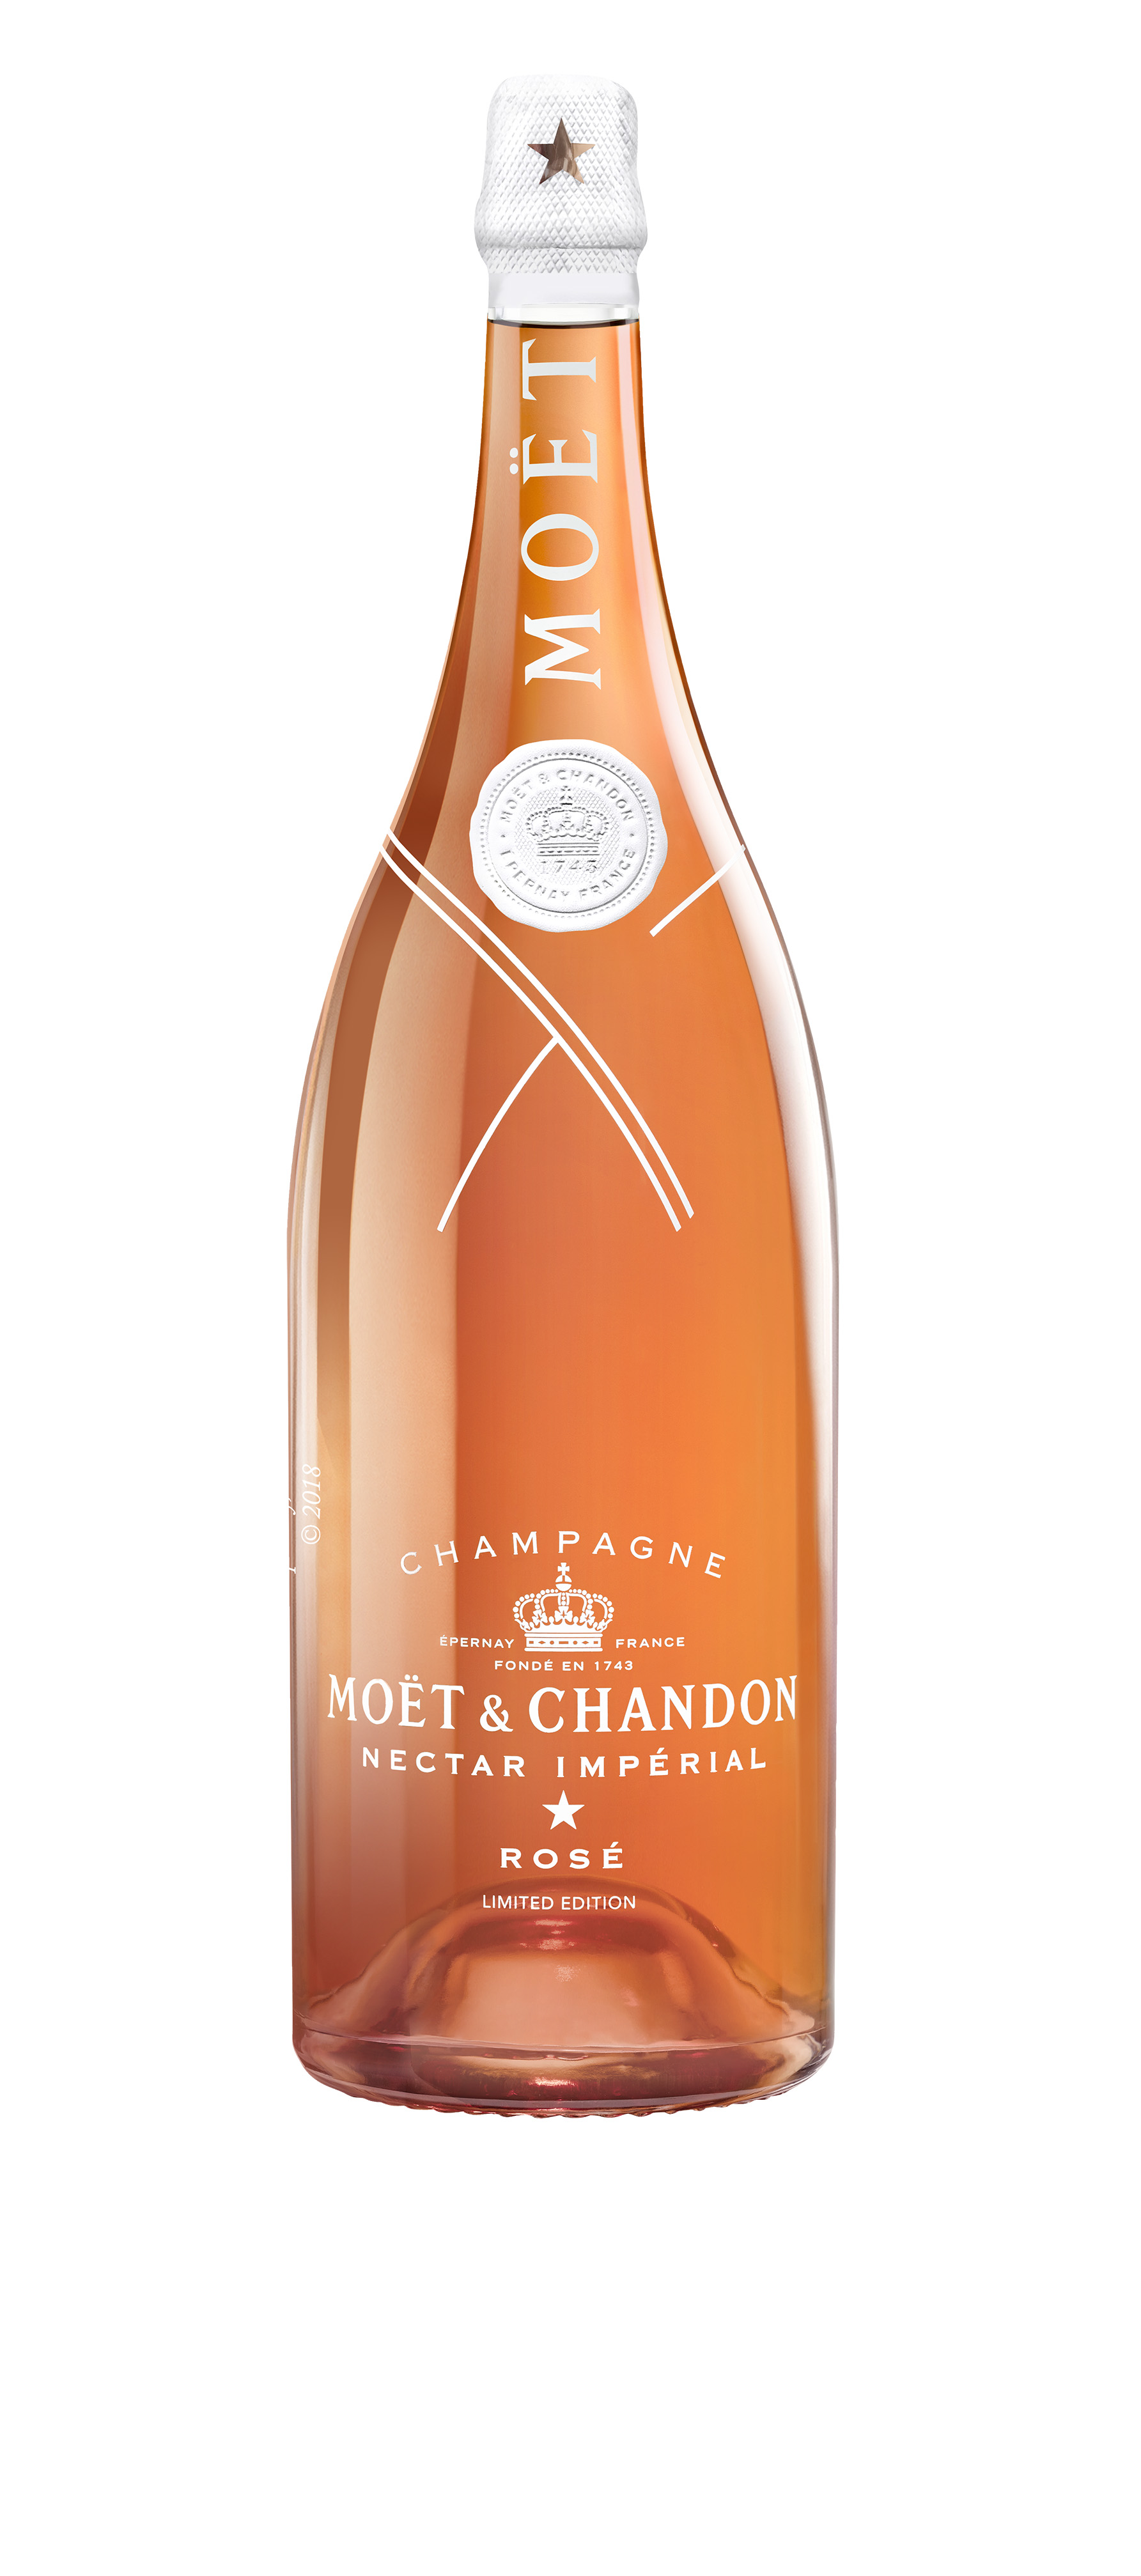 Big E wine and Liquor - We are the first in San Diego to have the new Moët  & Chandon C/O Virgil Abloh collaboration bottle in stock. Make sure to stop  by